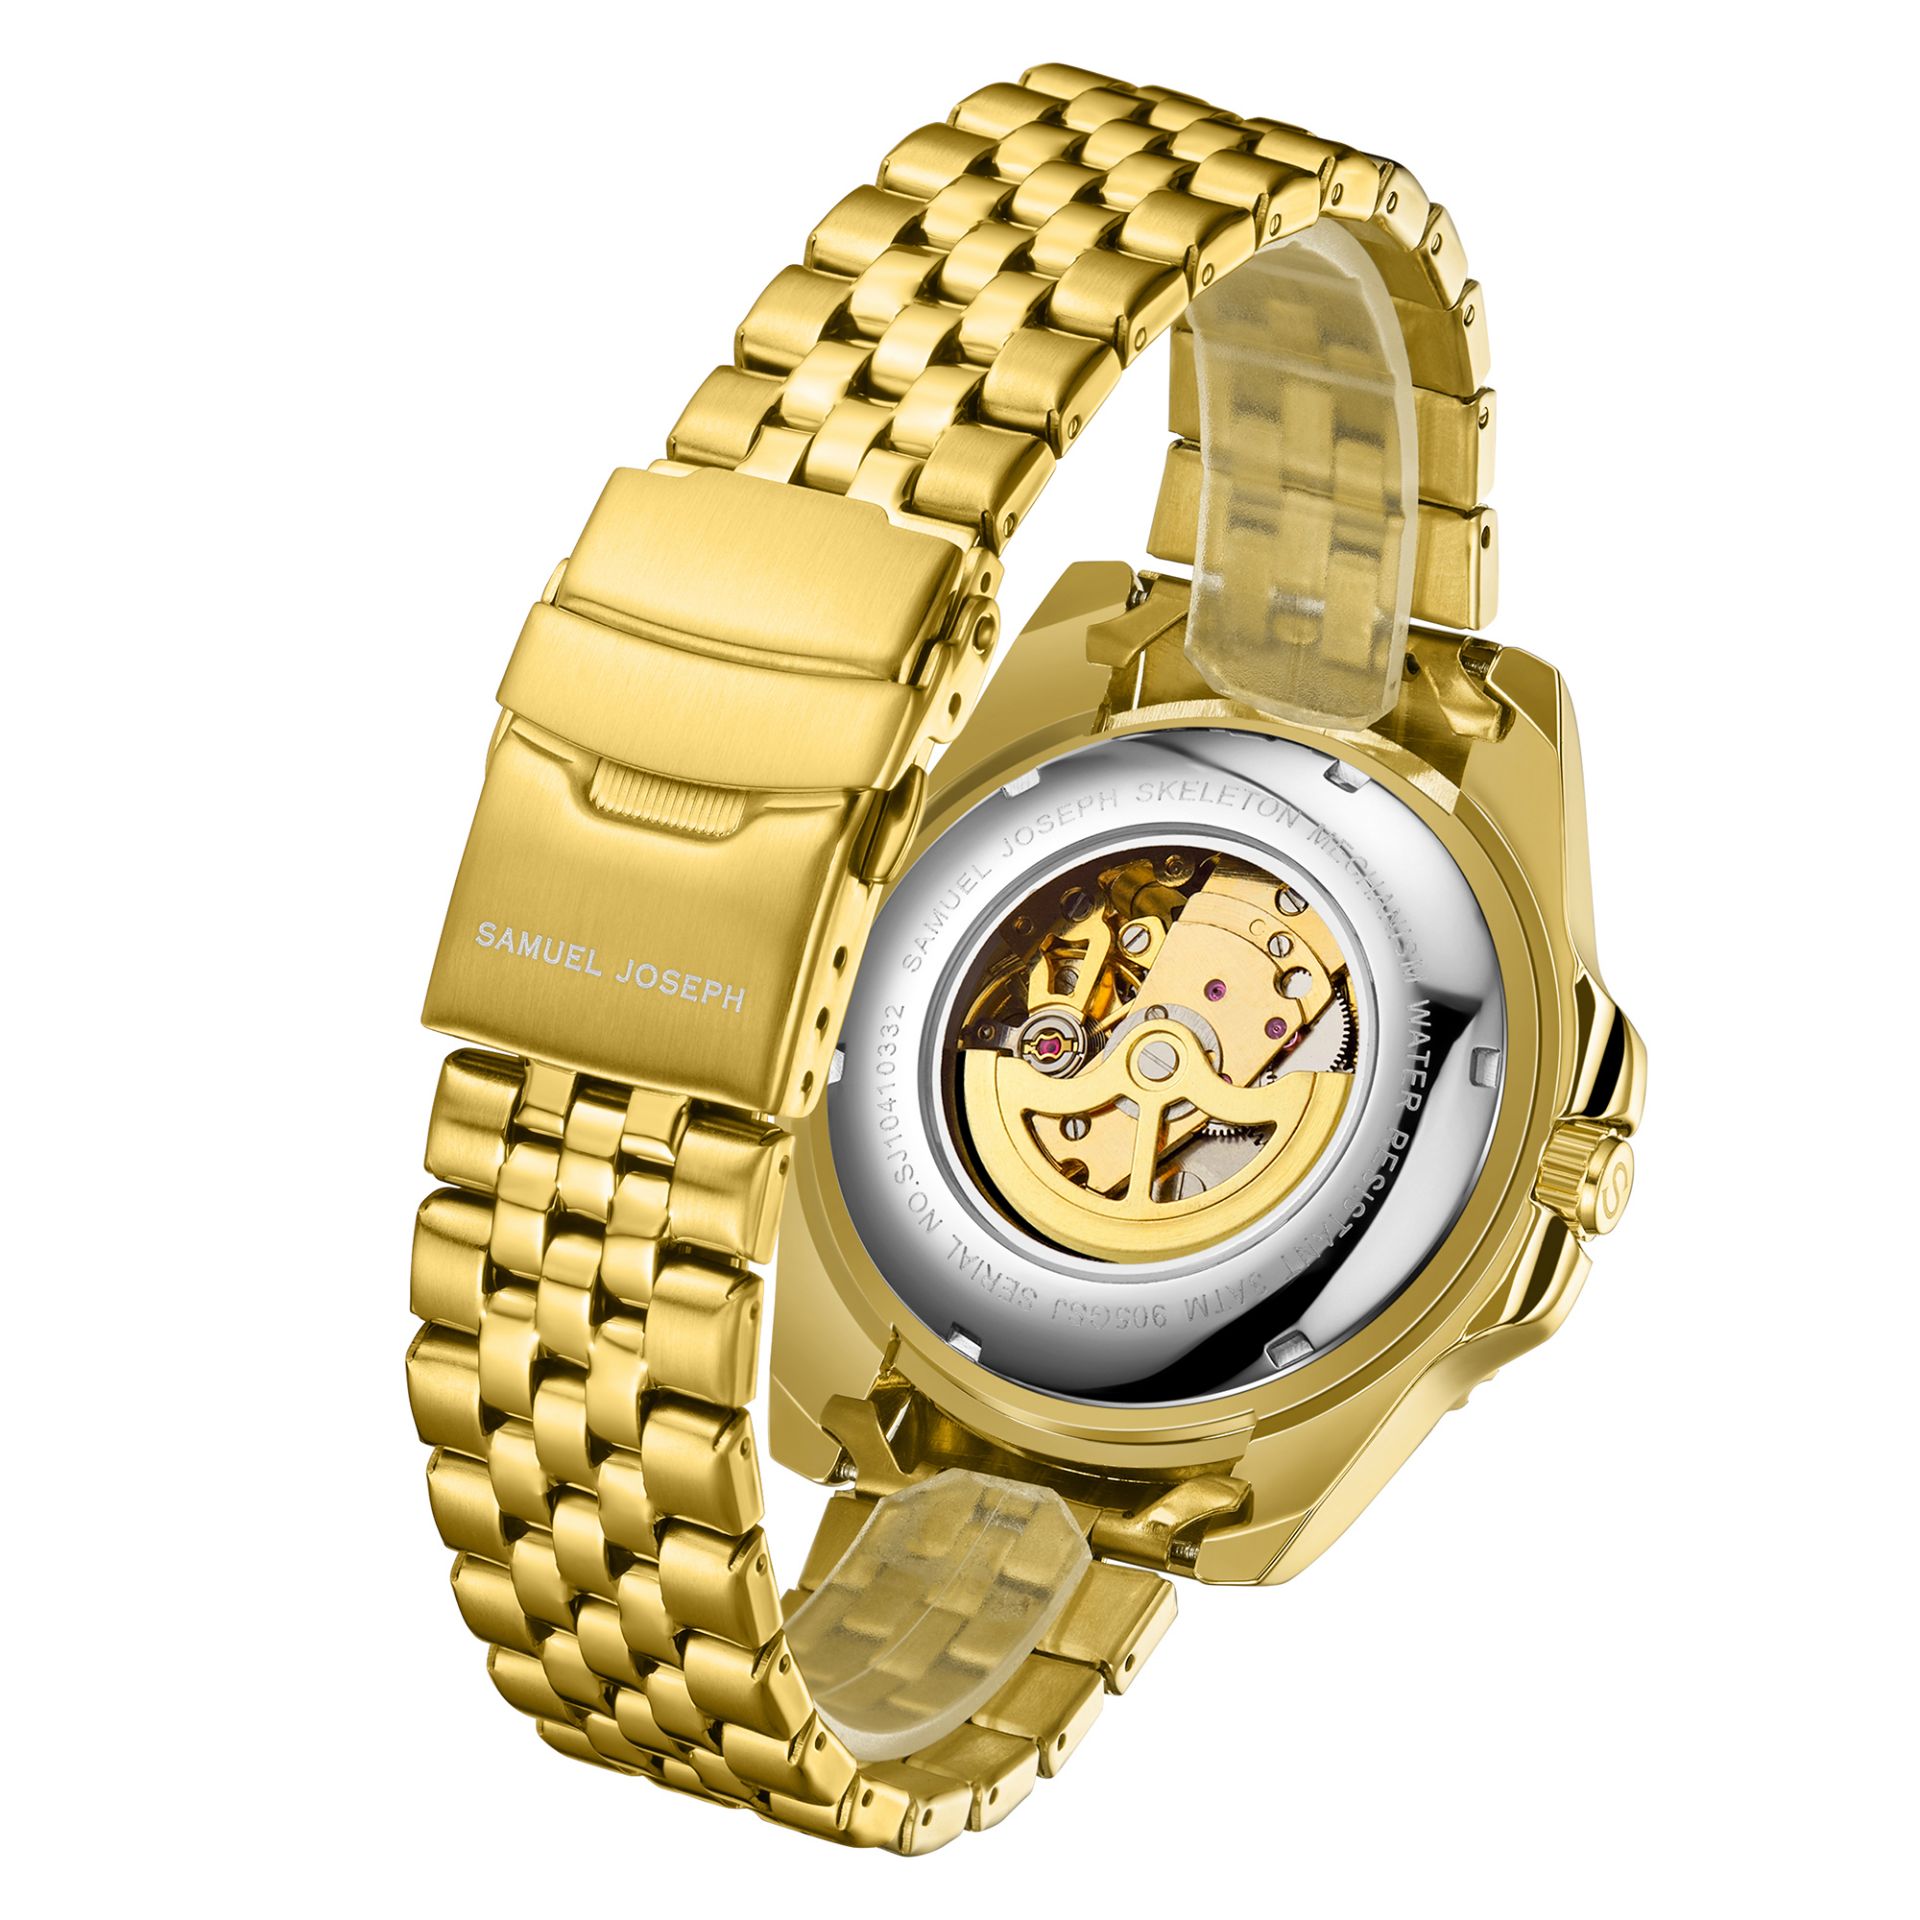 Samuel Joseph Limited Edition Skeleton Mechanism Gold Watch - Free Delivery & 2 Year Warranty - Image 4 of 5